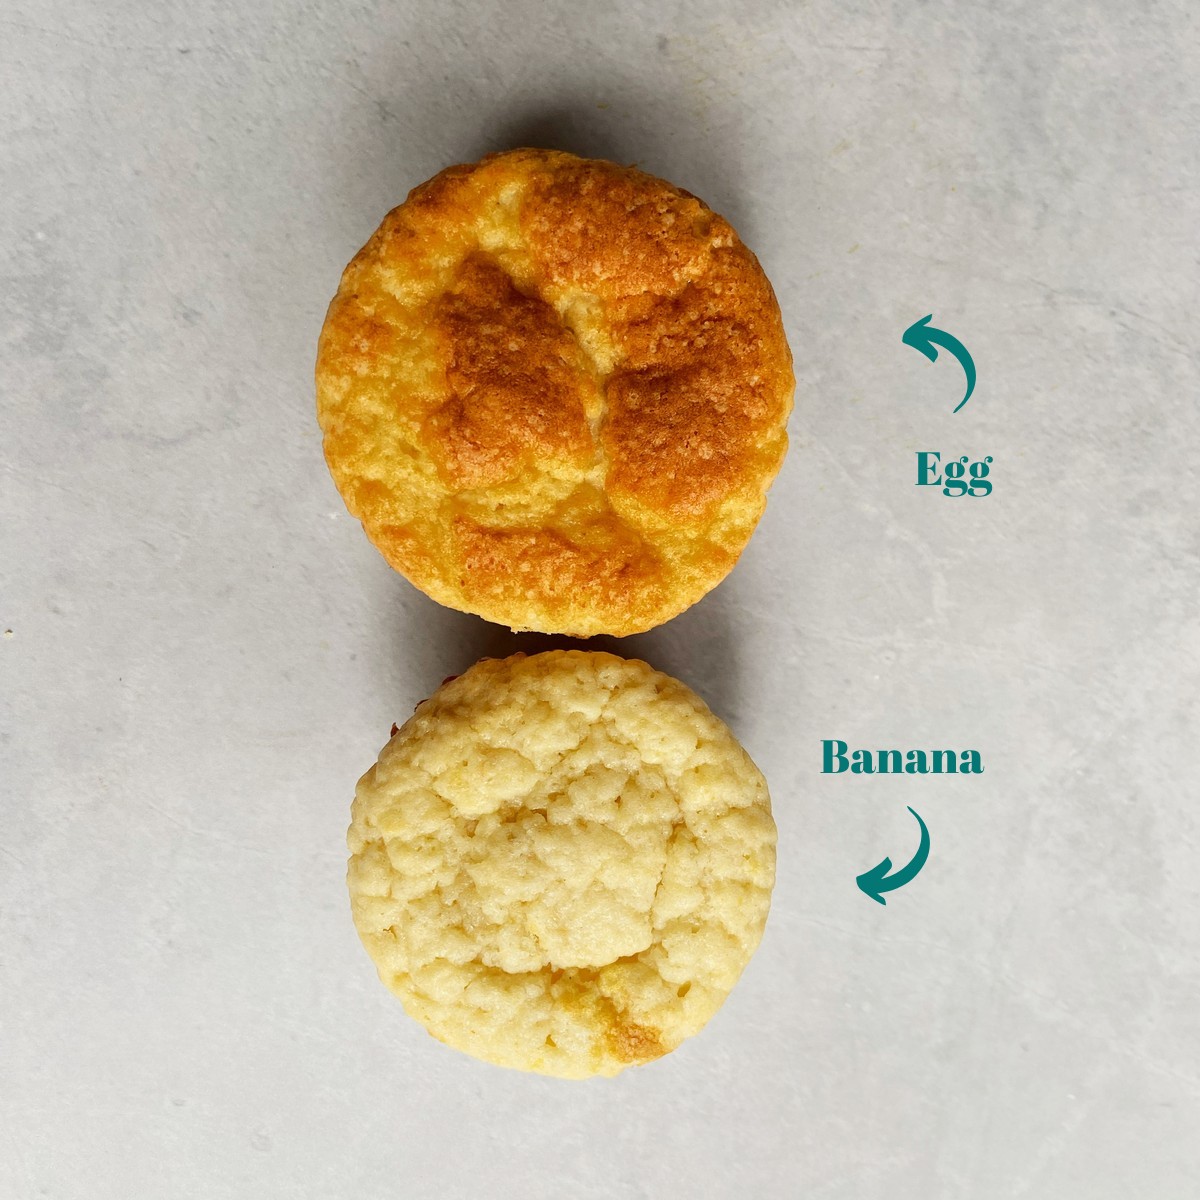 A muffin made with egg and another made with banana.